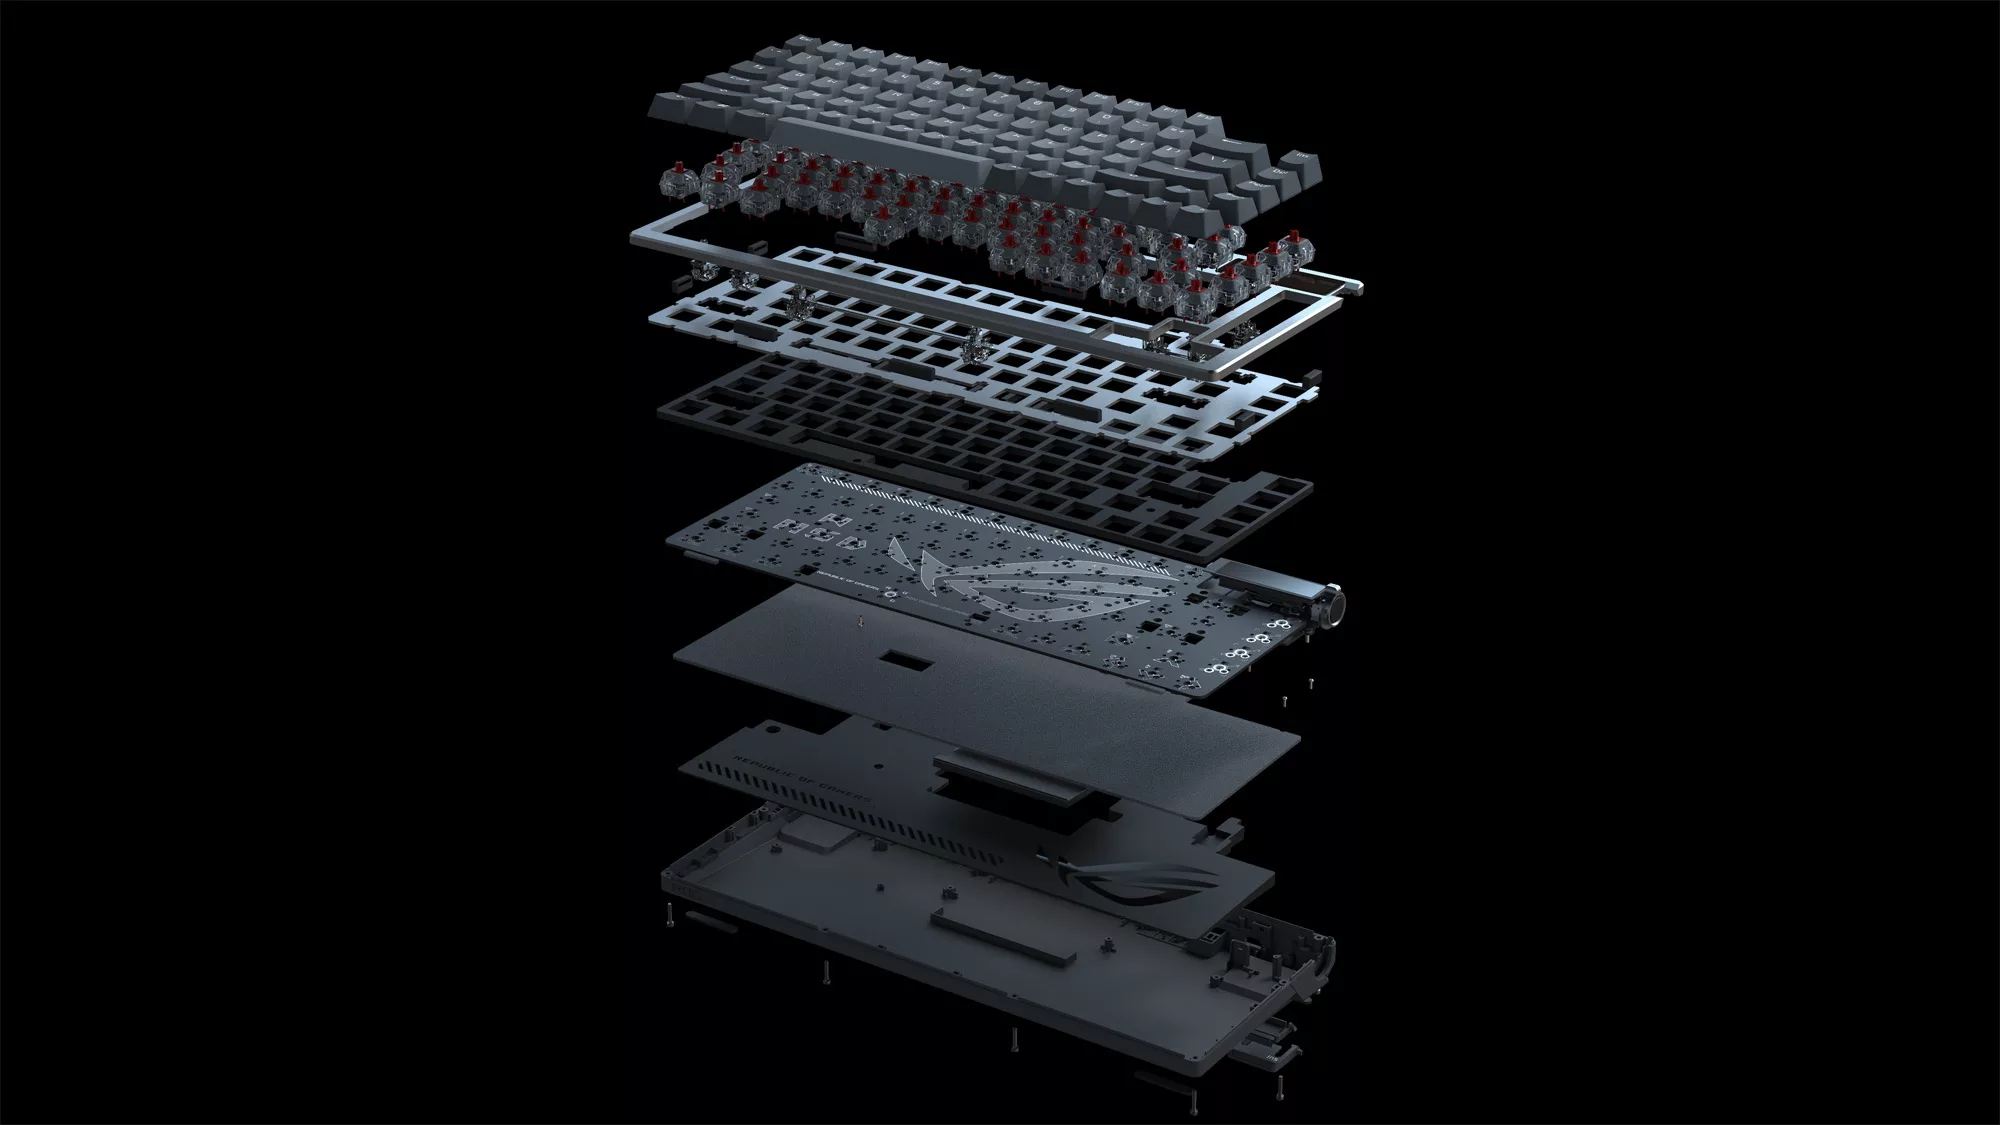 An exploded view of the ROG Azoth keyboard, showing the layers of dampening foam between the other components.